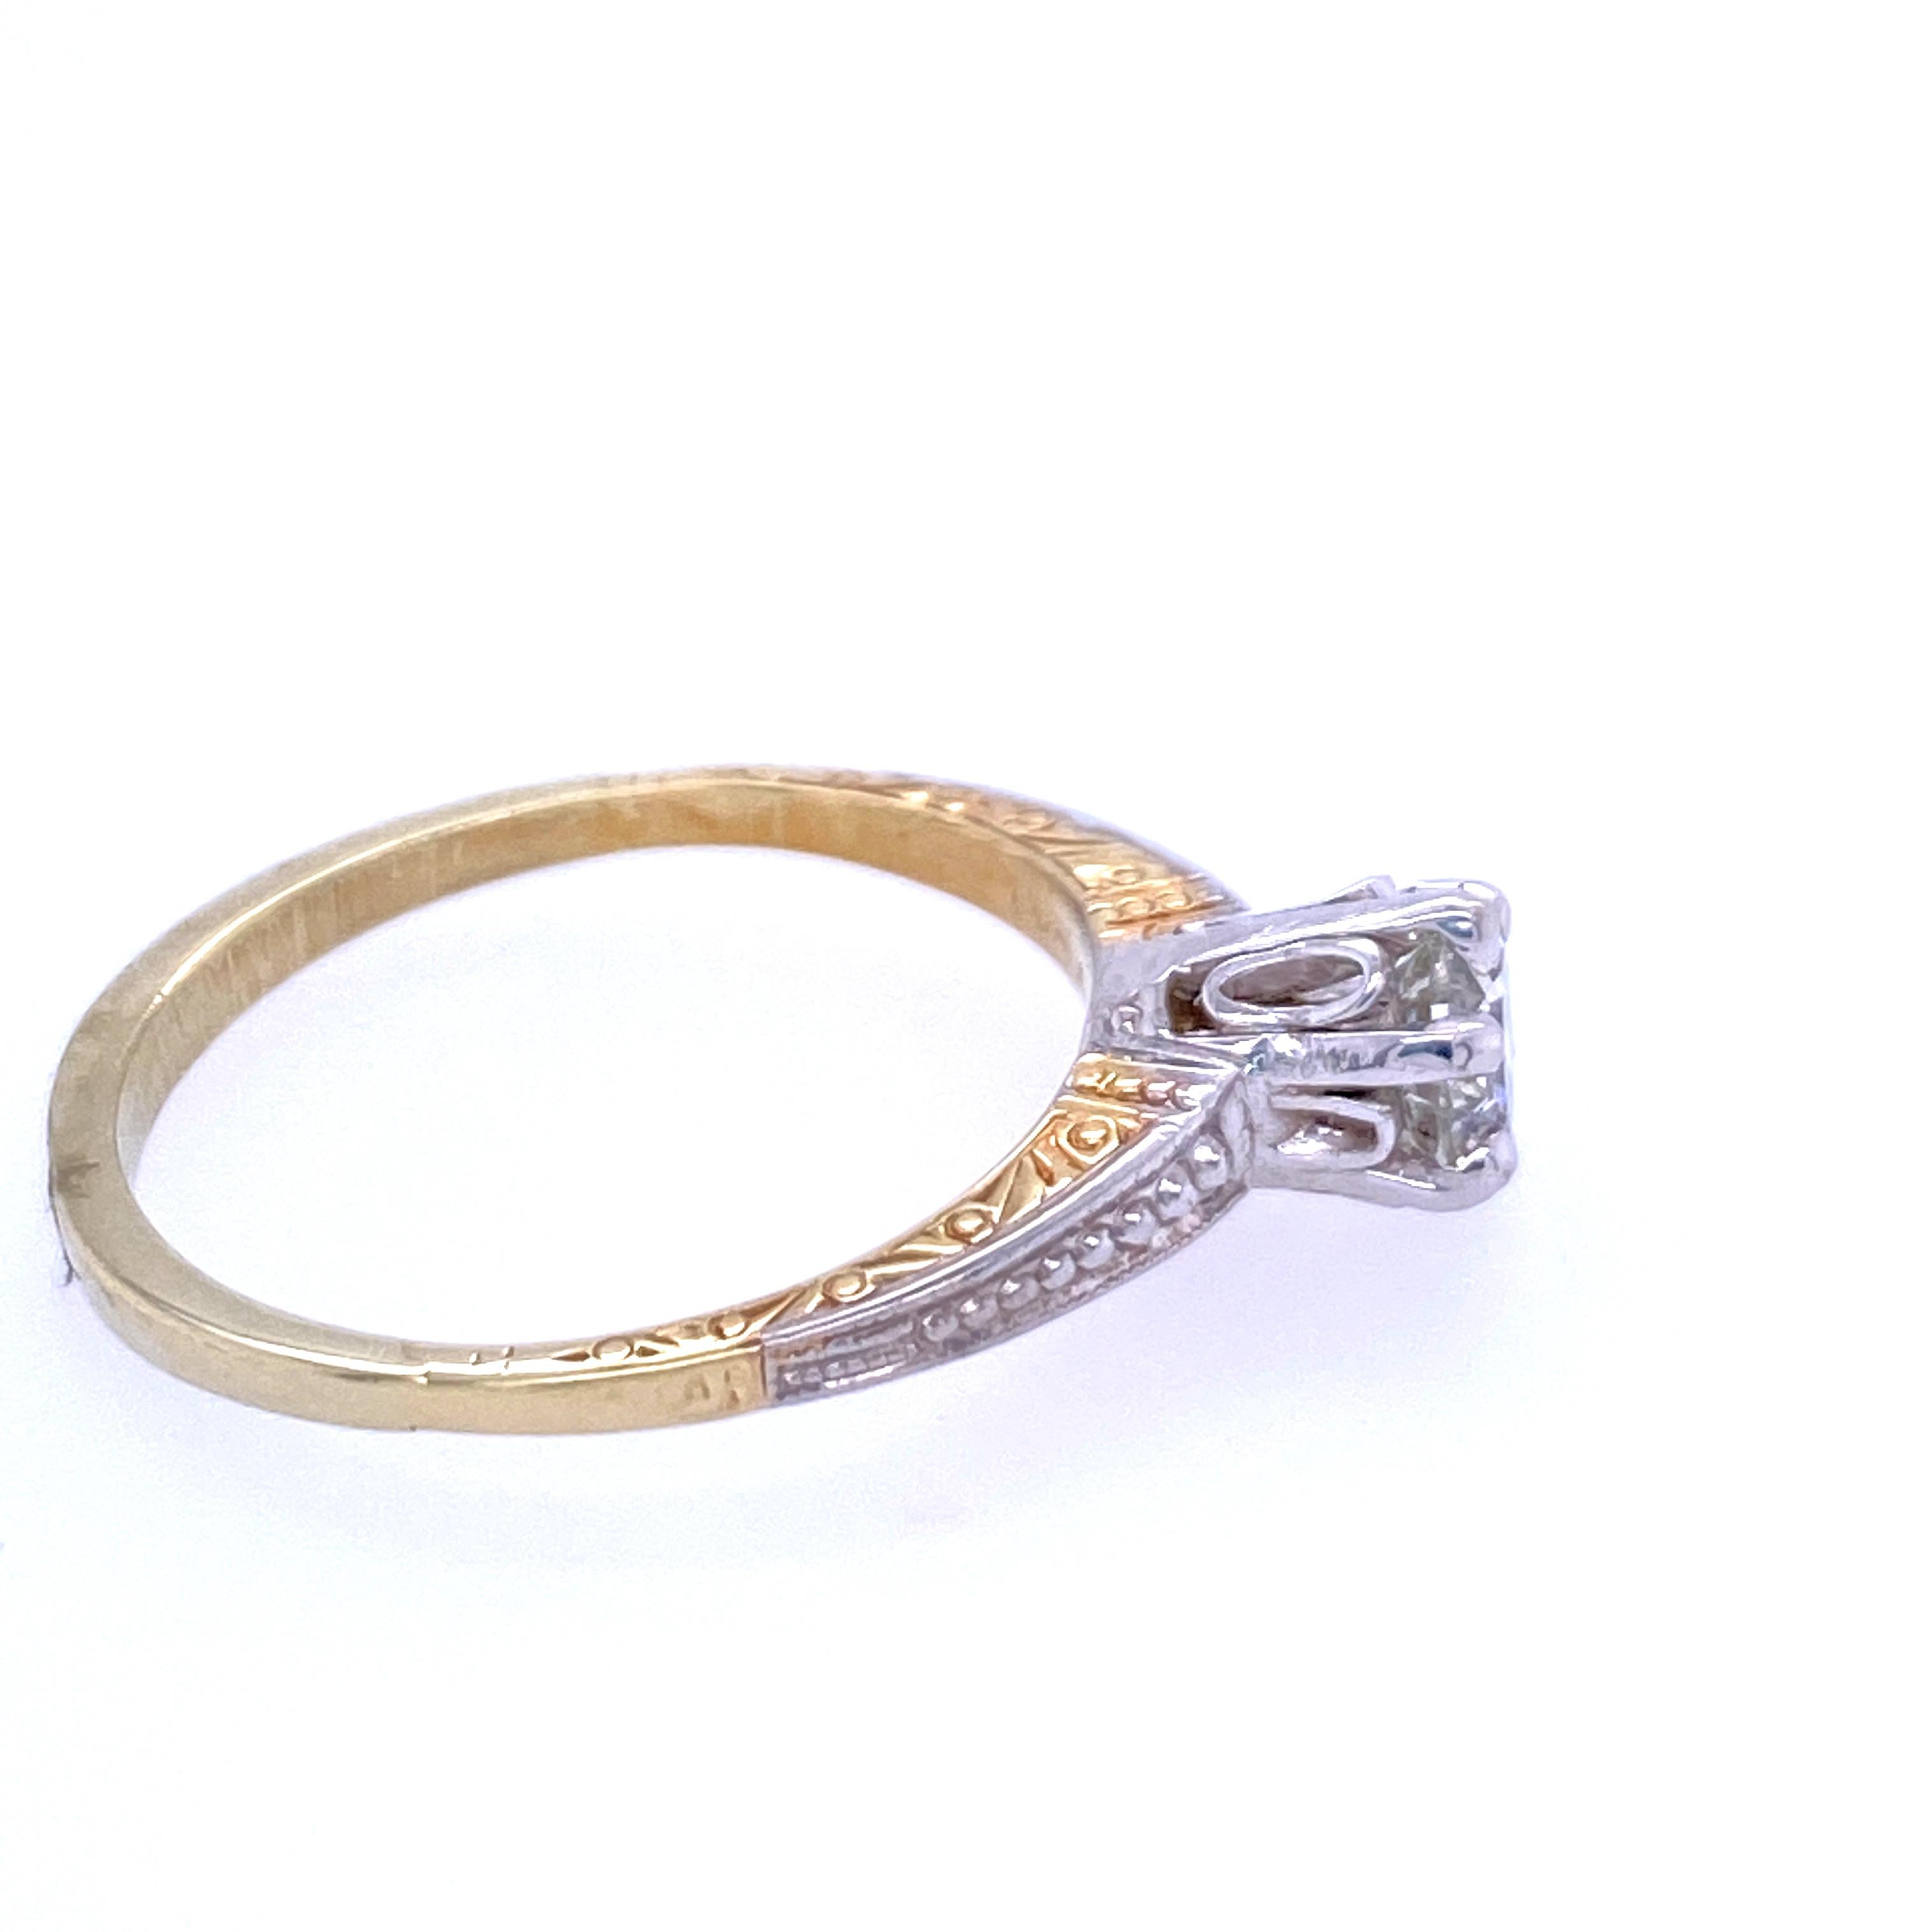 One 14 karat yellow and white gold (stamped 14K) engagement ring prong set with with one 0.57 carat round brilliant diamond with K color and I1 clarity.  The diamond is set in a six prong white gold engraved mounting with a beaded white gold top. 